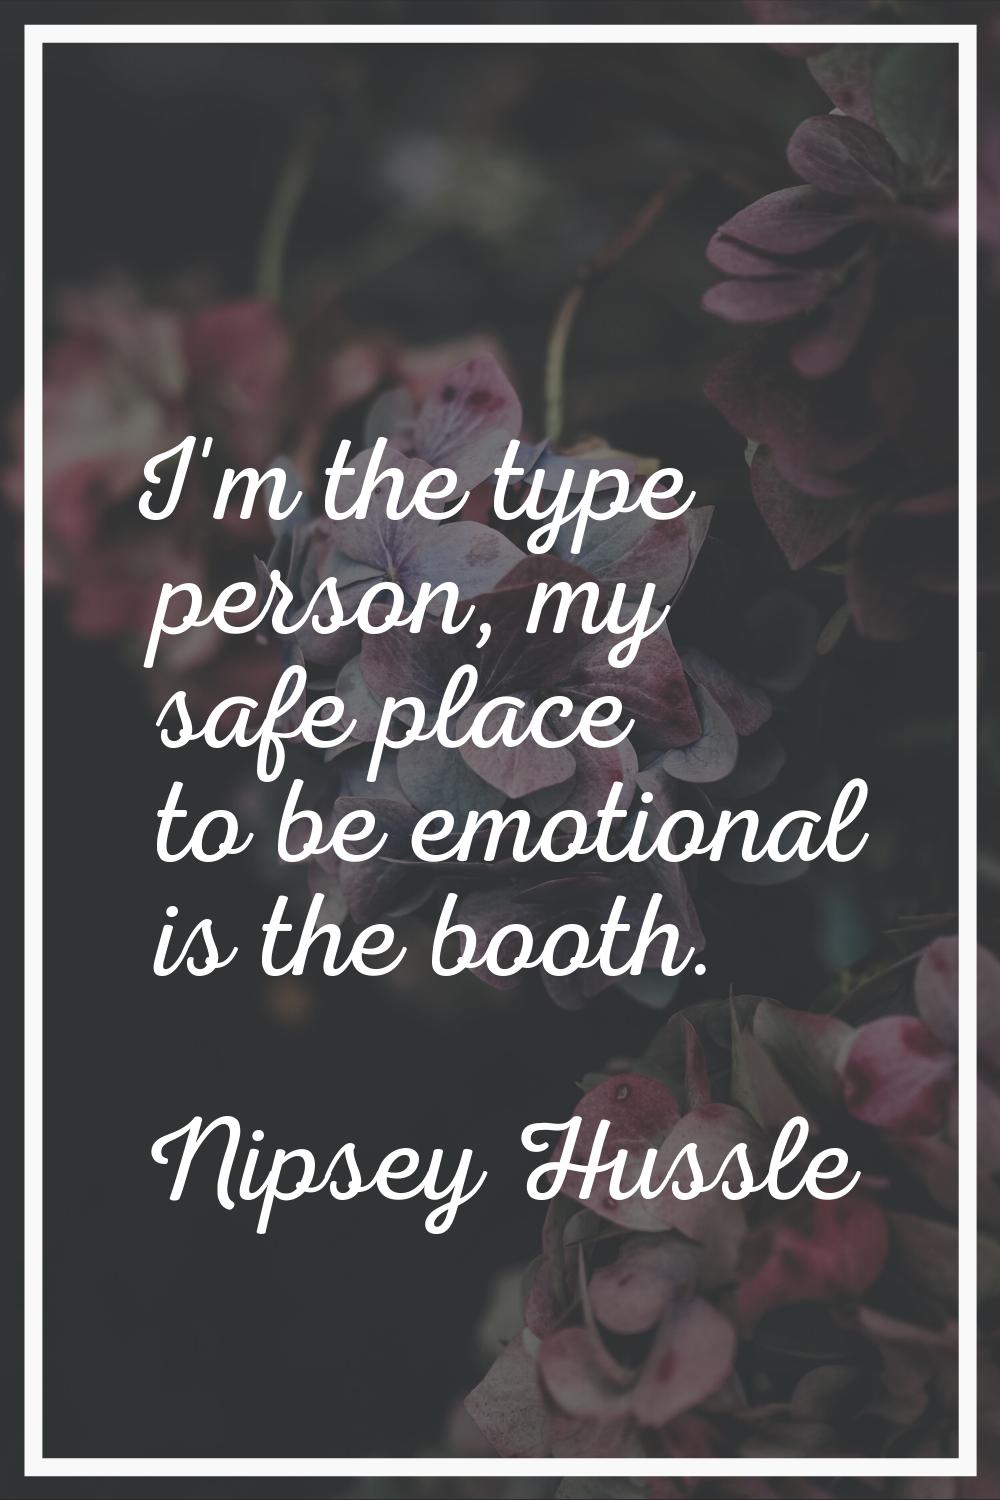 I'm the type person, my safe place to be emotional is the booth.